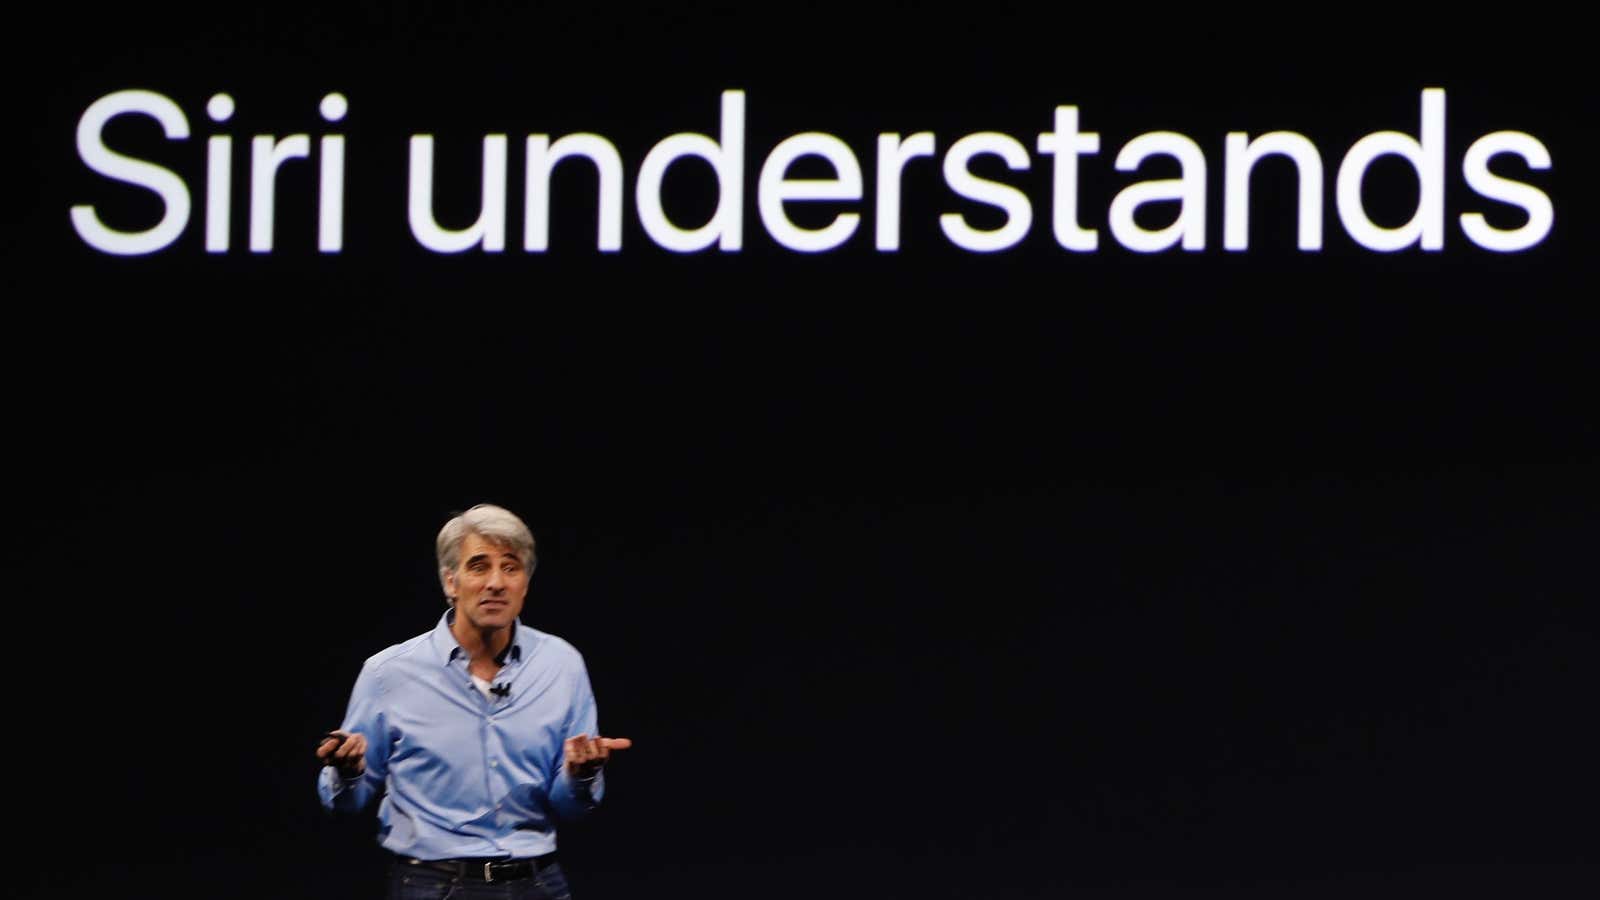 Craig Federighi, Apple’s software engineering chief, speaks during the company’s developer conference (2017).